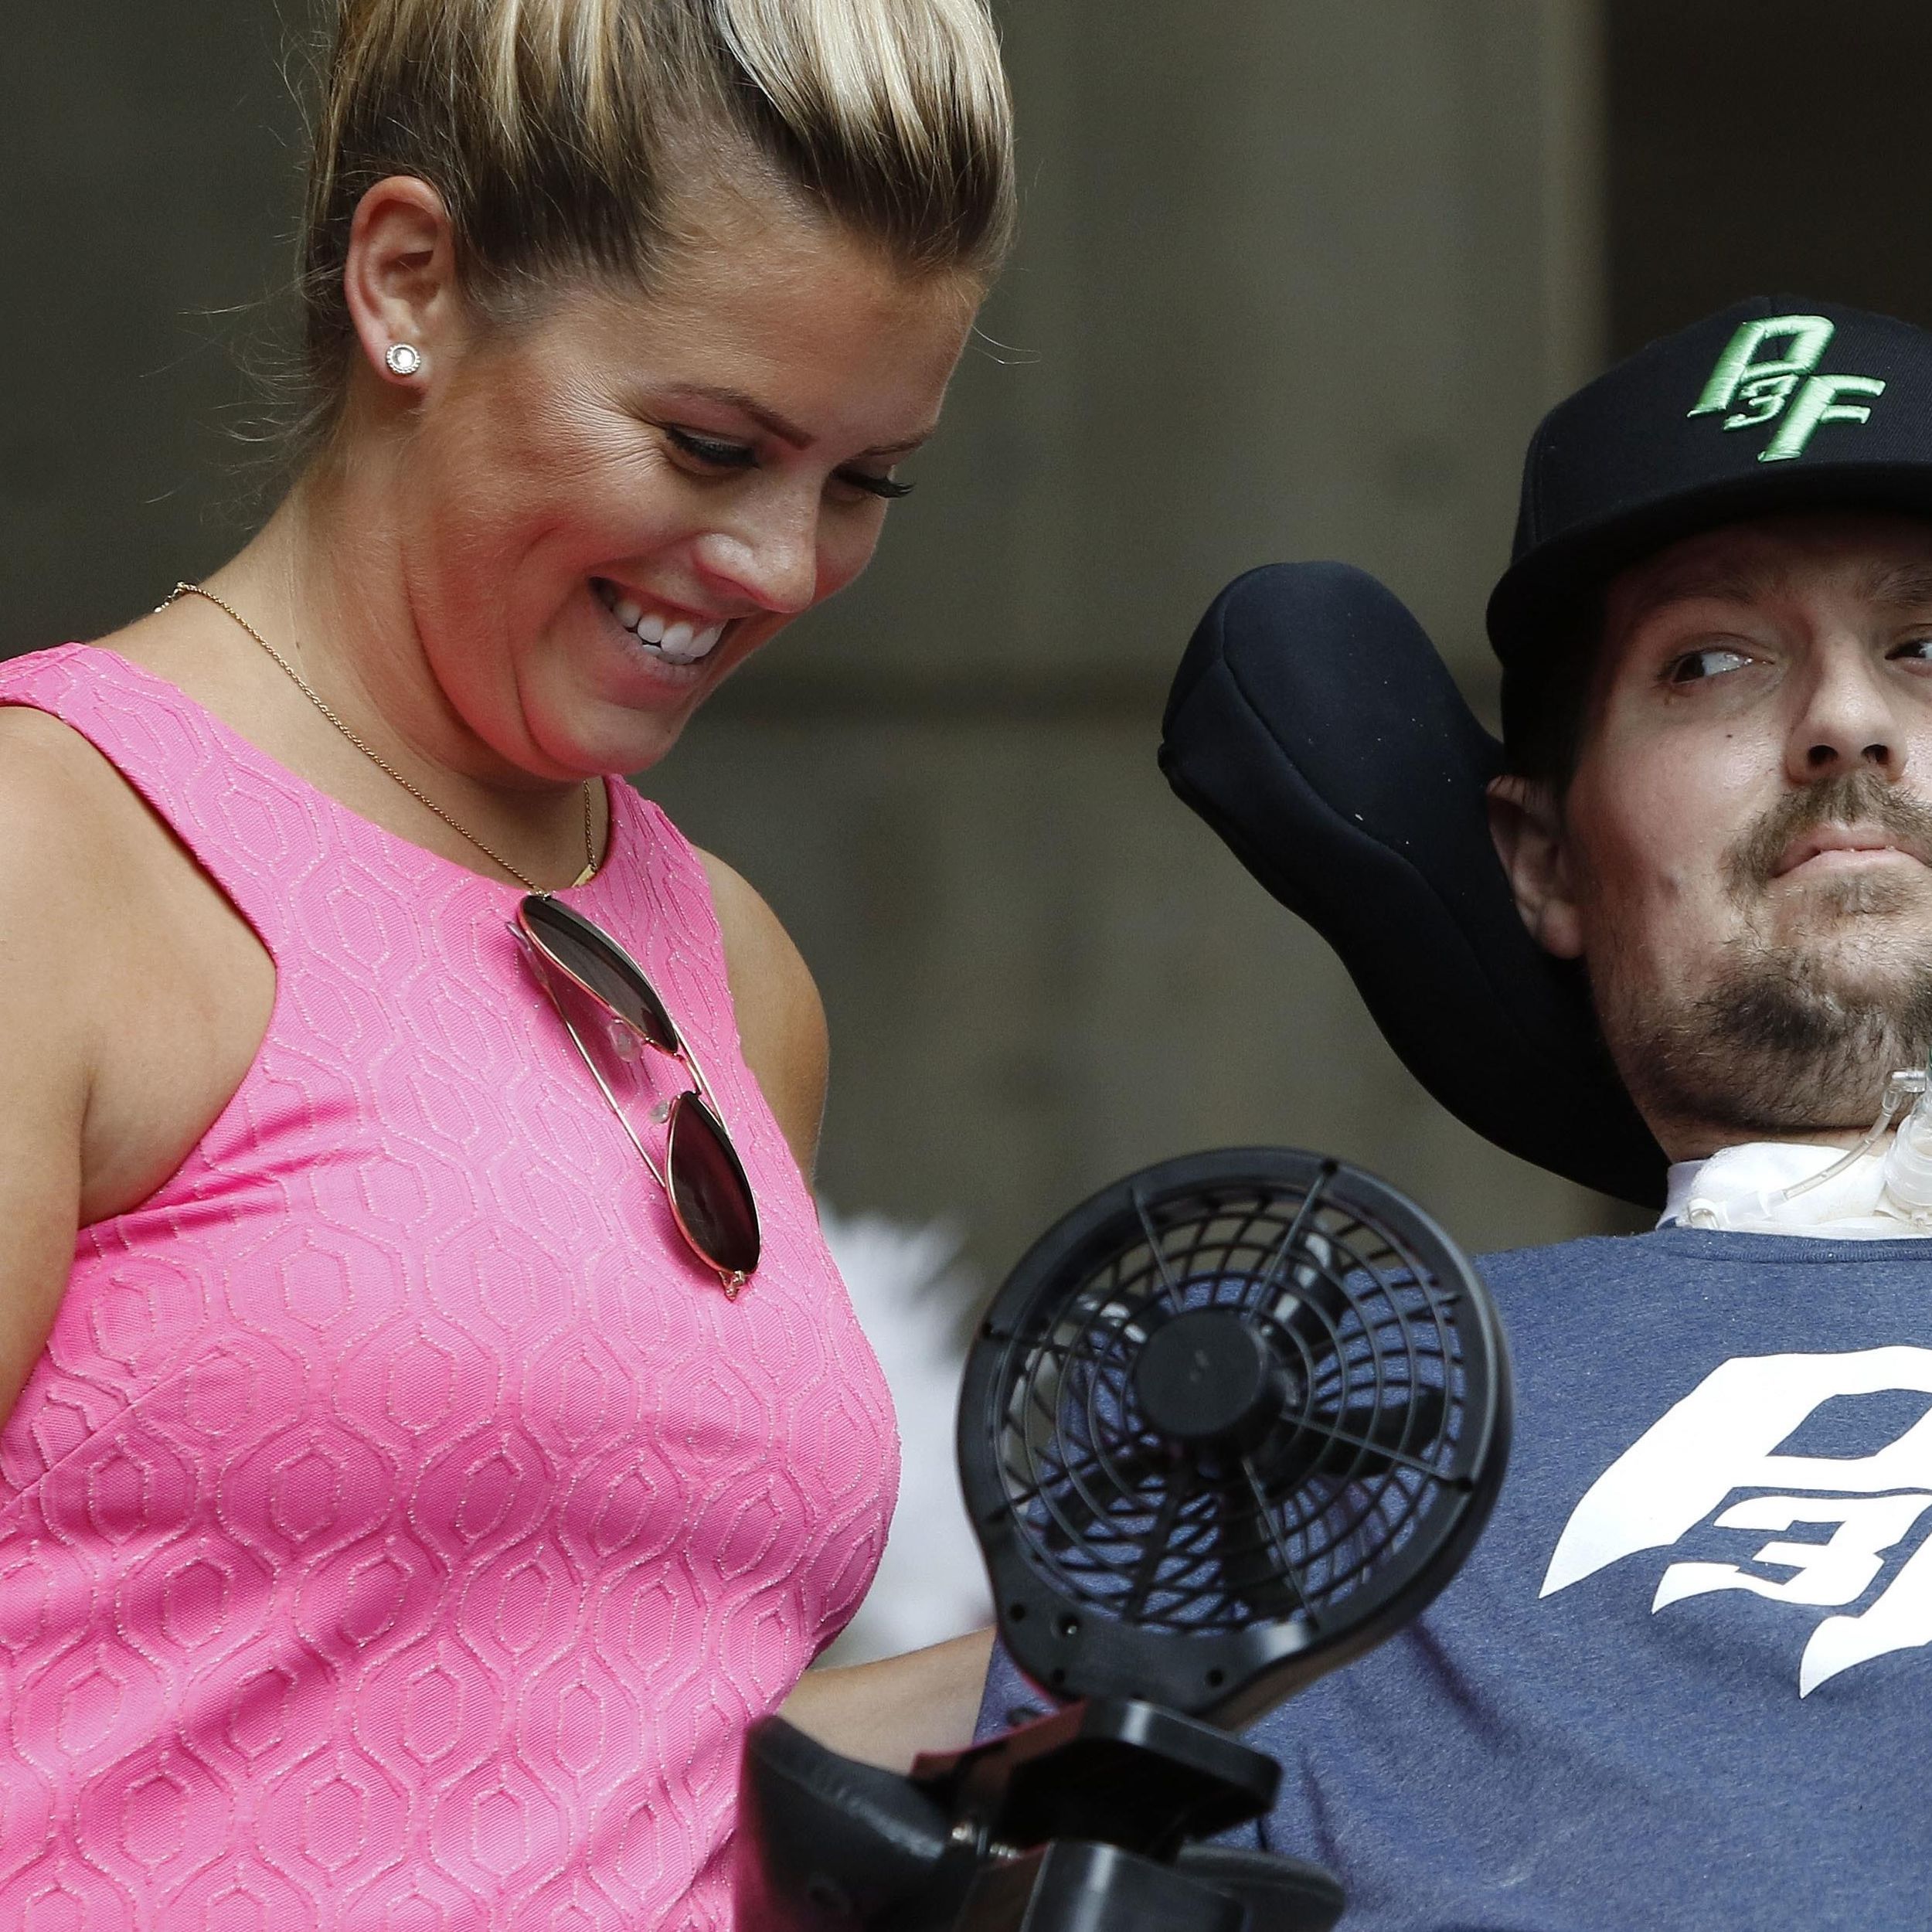 PHOTOS: Funeral for Pete Frates, inspiration behind ALS Ice Bucket